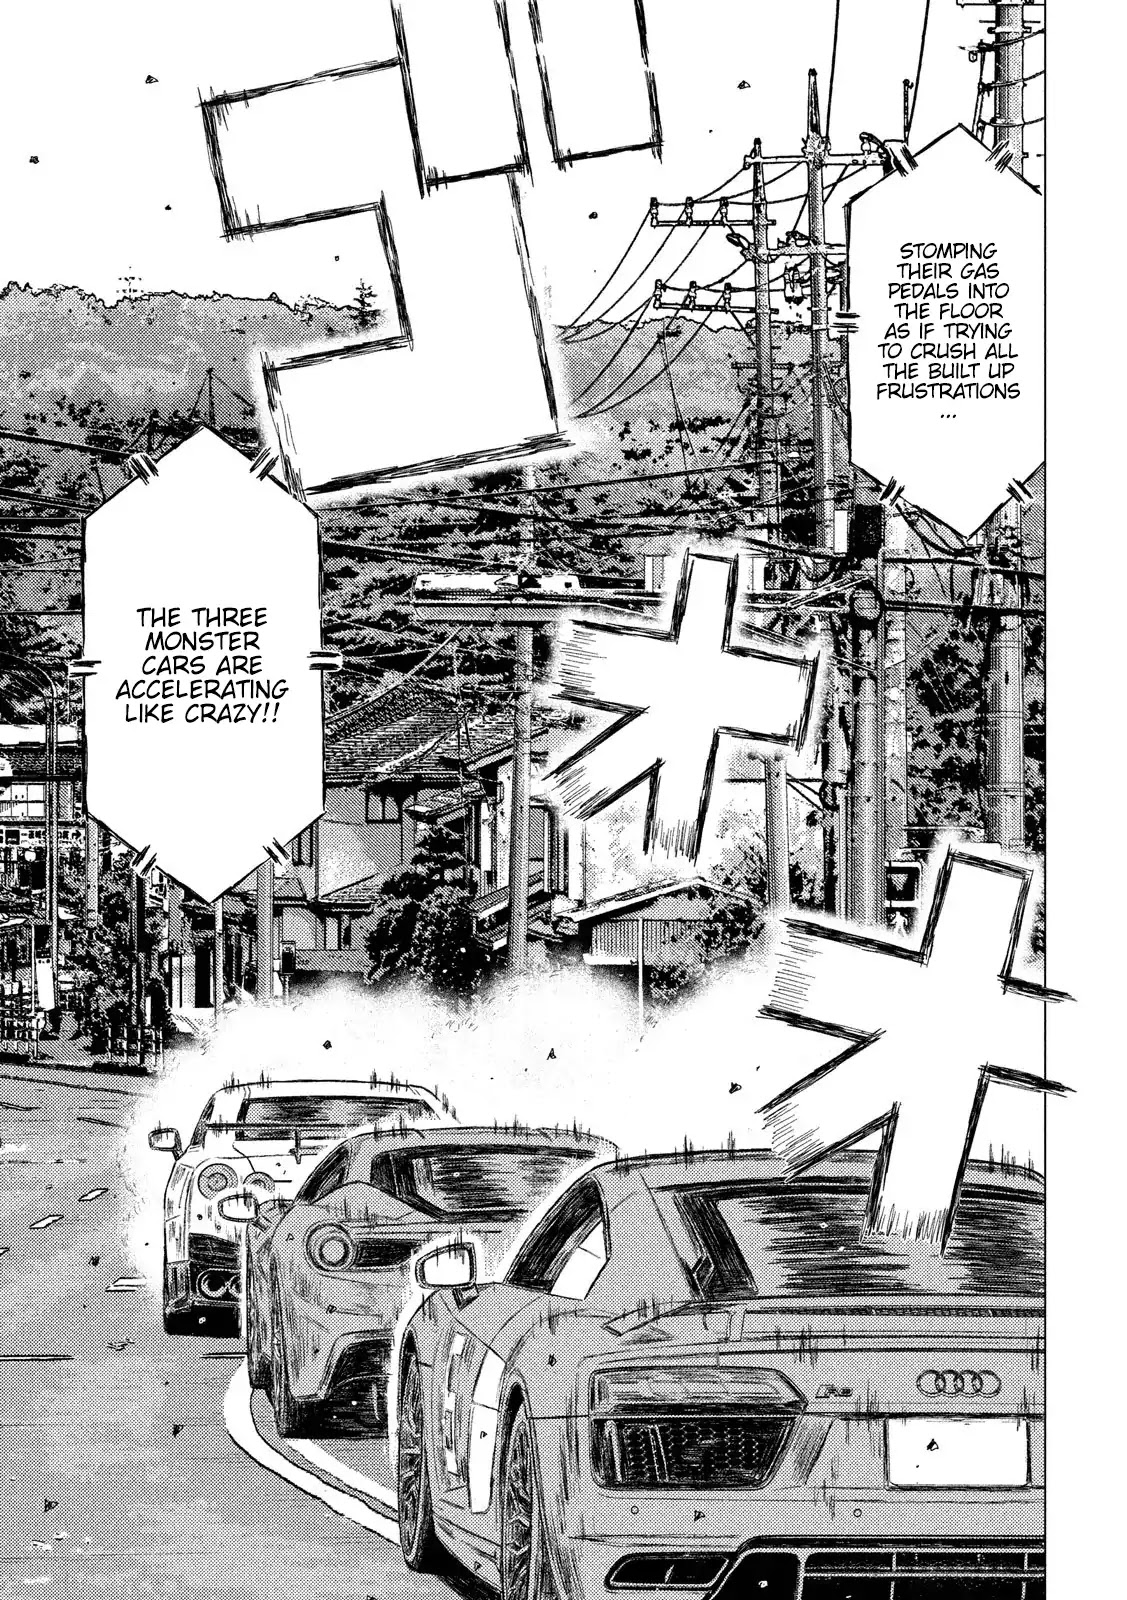 MF Ghost Chapter 42: Dog Fight At 300 Km/h